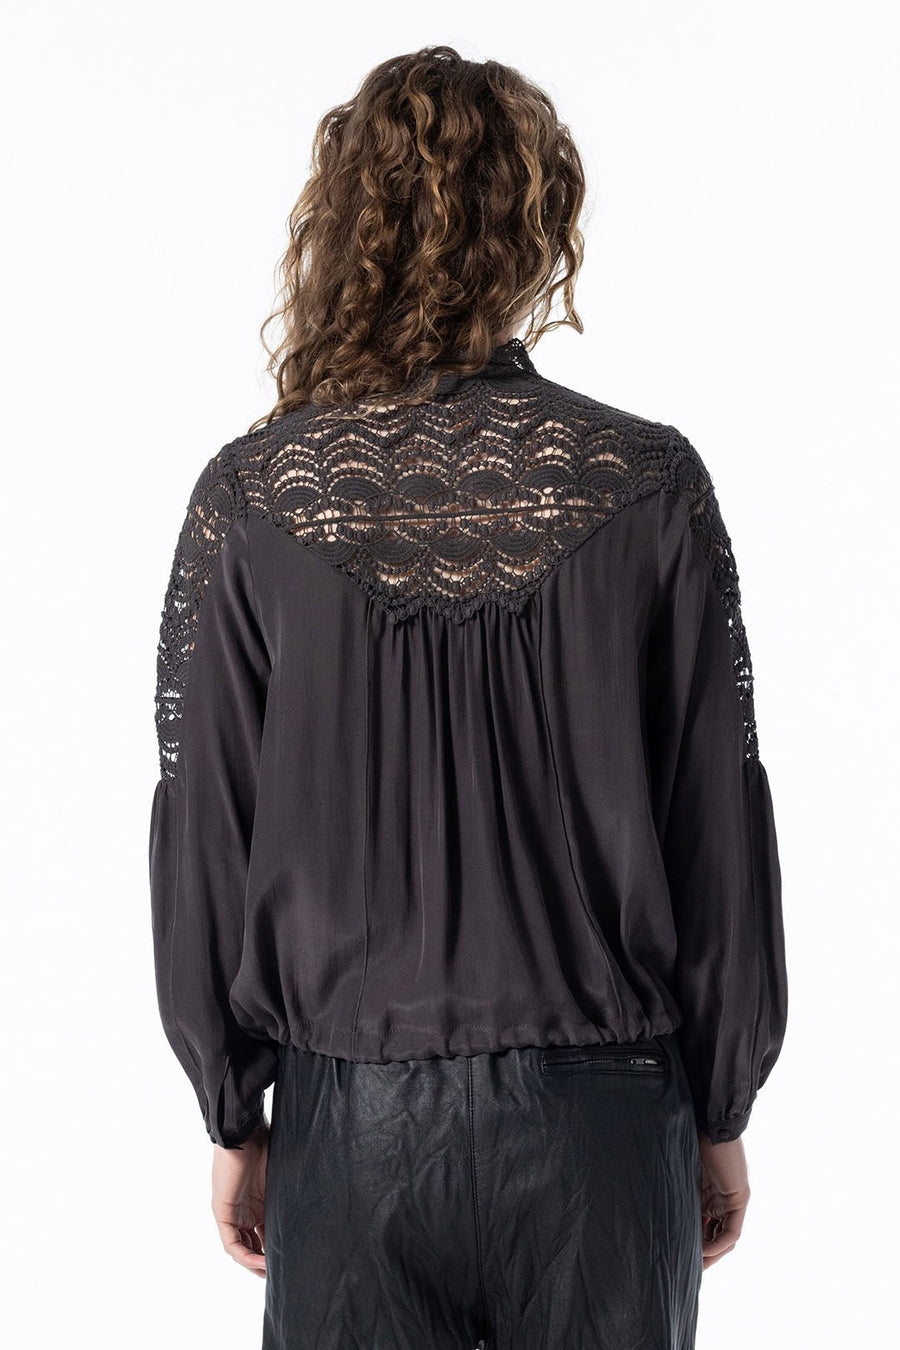 THE EMPRESS LONG SLEEVE BLOUSE, LICORICE - Burning Torch Online Boutique